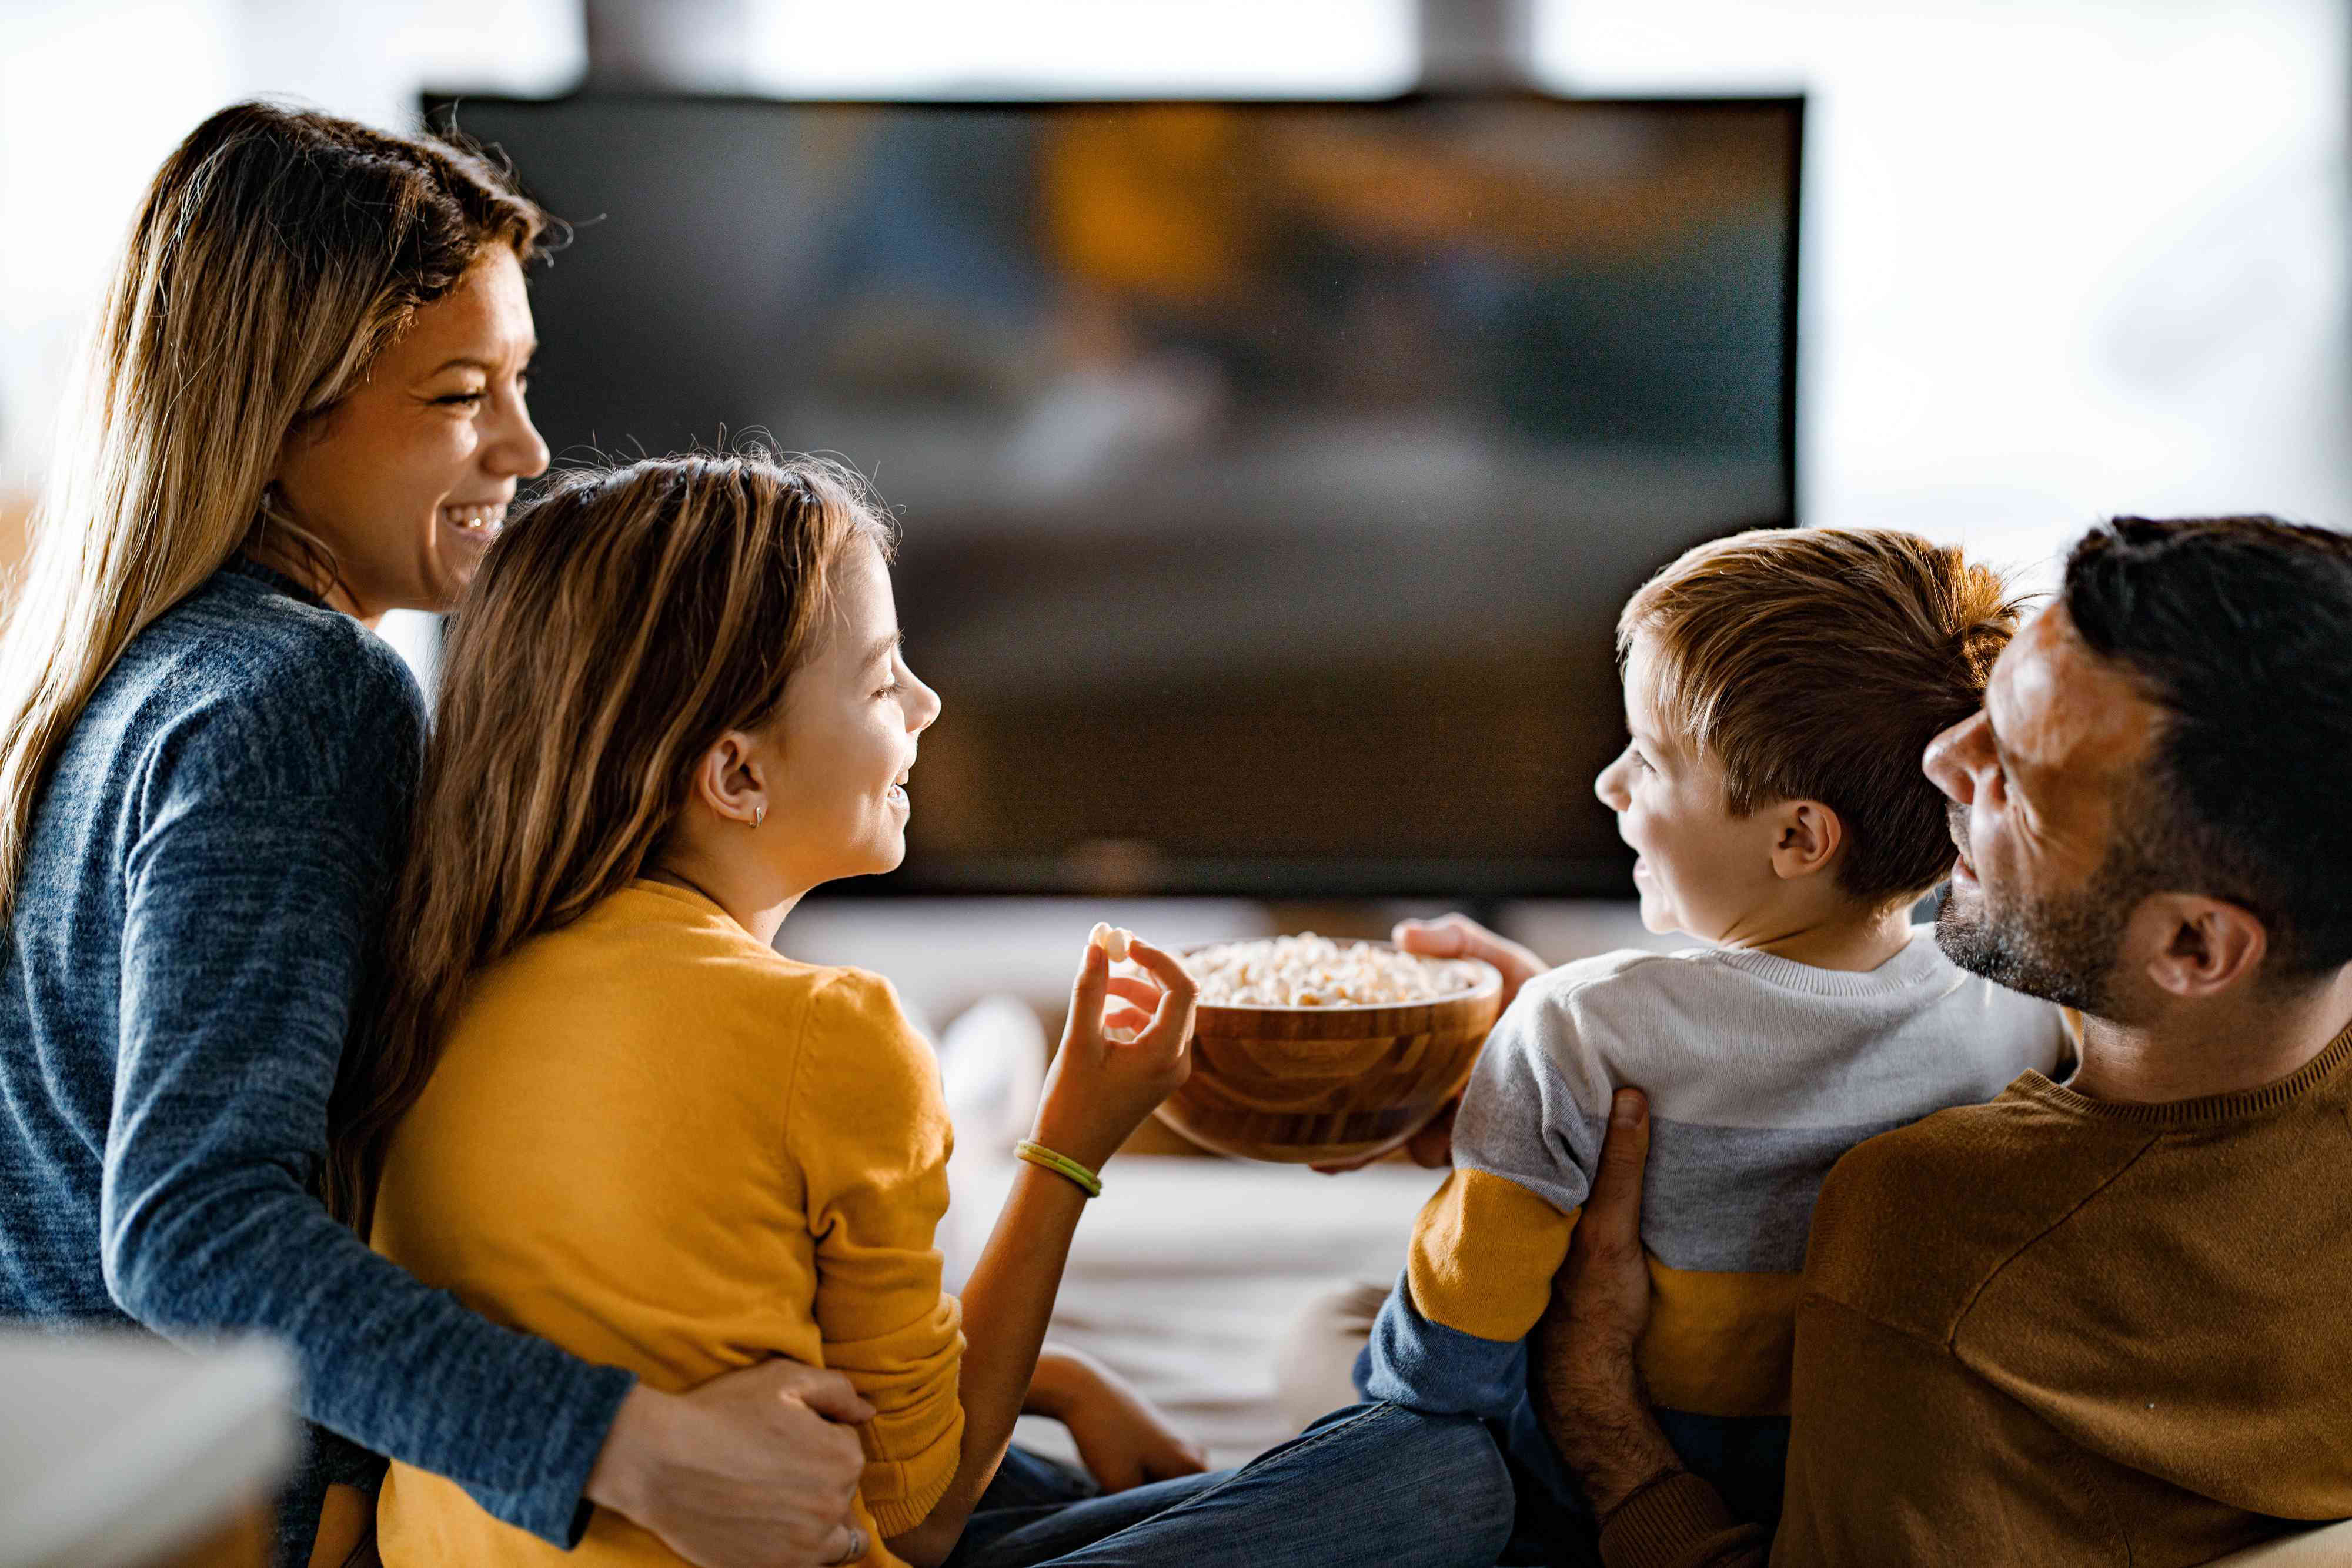 Parents' Most Loved (and Most Hated) TV Shows for Children